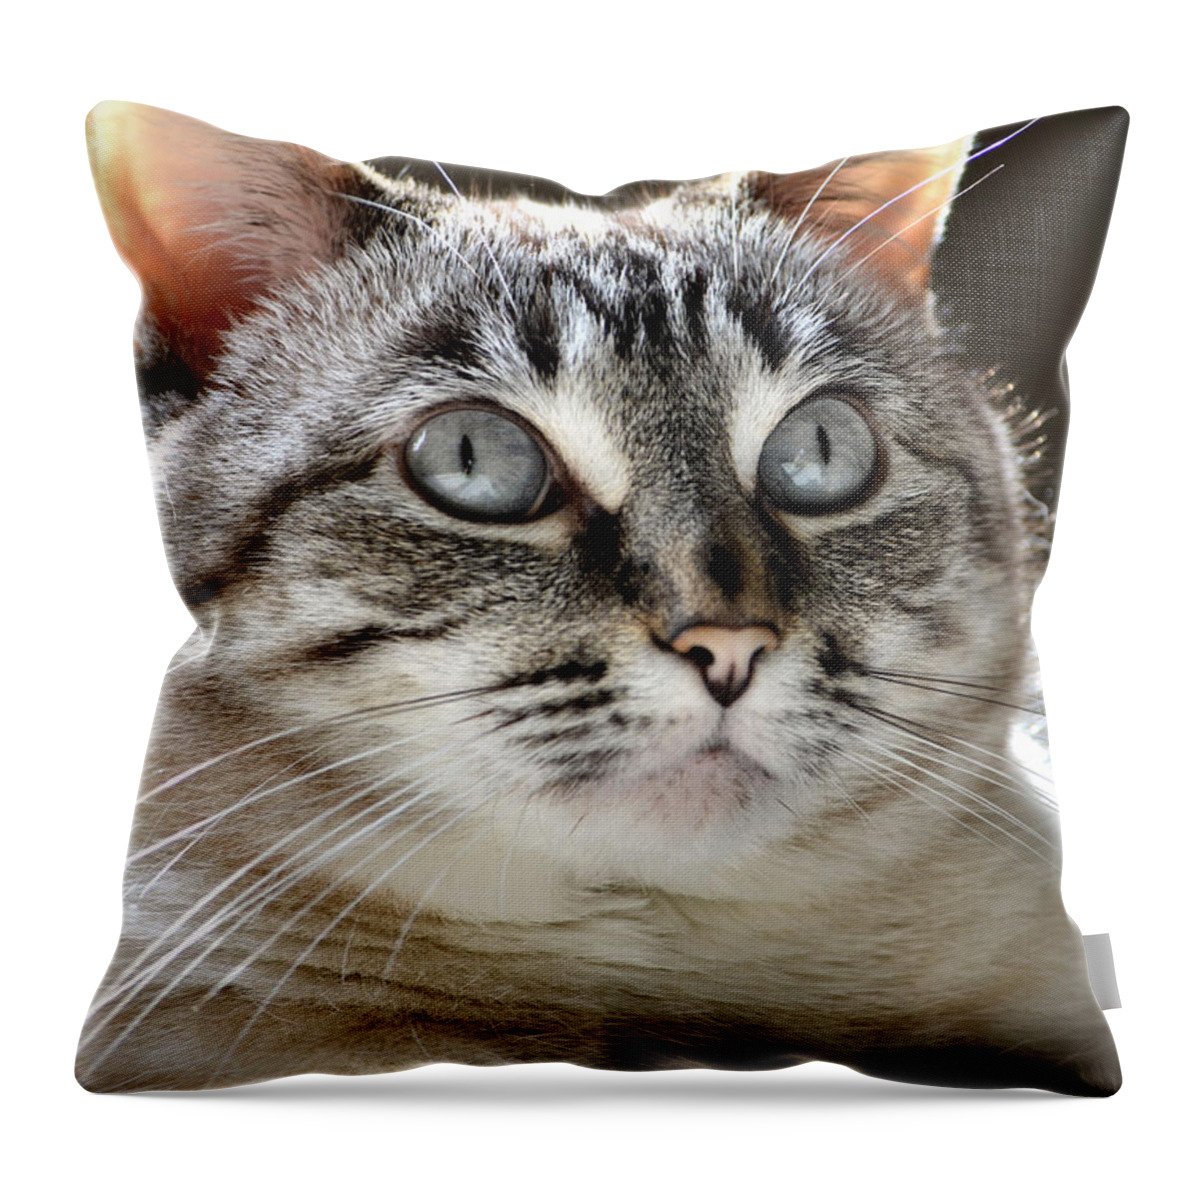 Cat Throw Pillow featuring the photograph Sweet Innocence by Deb Halloran